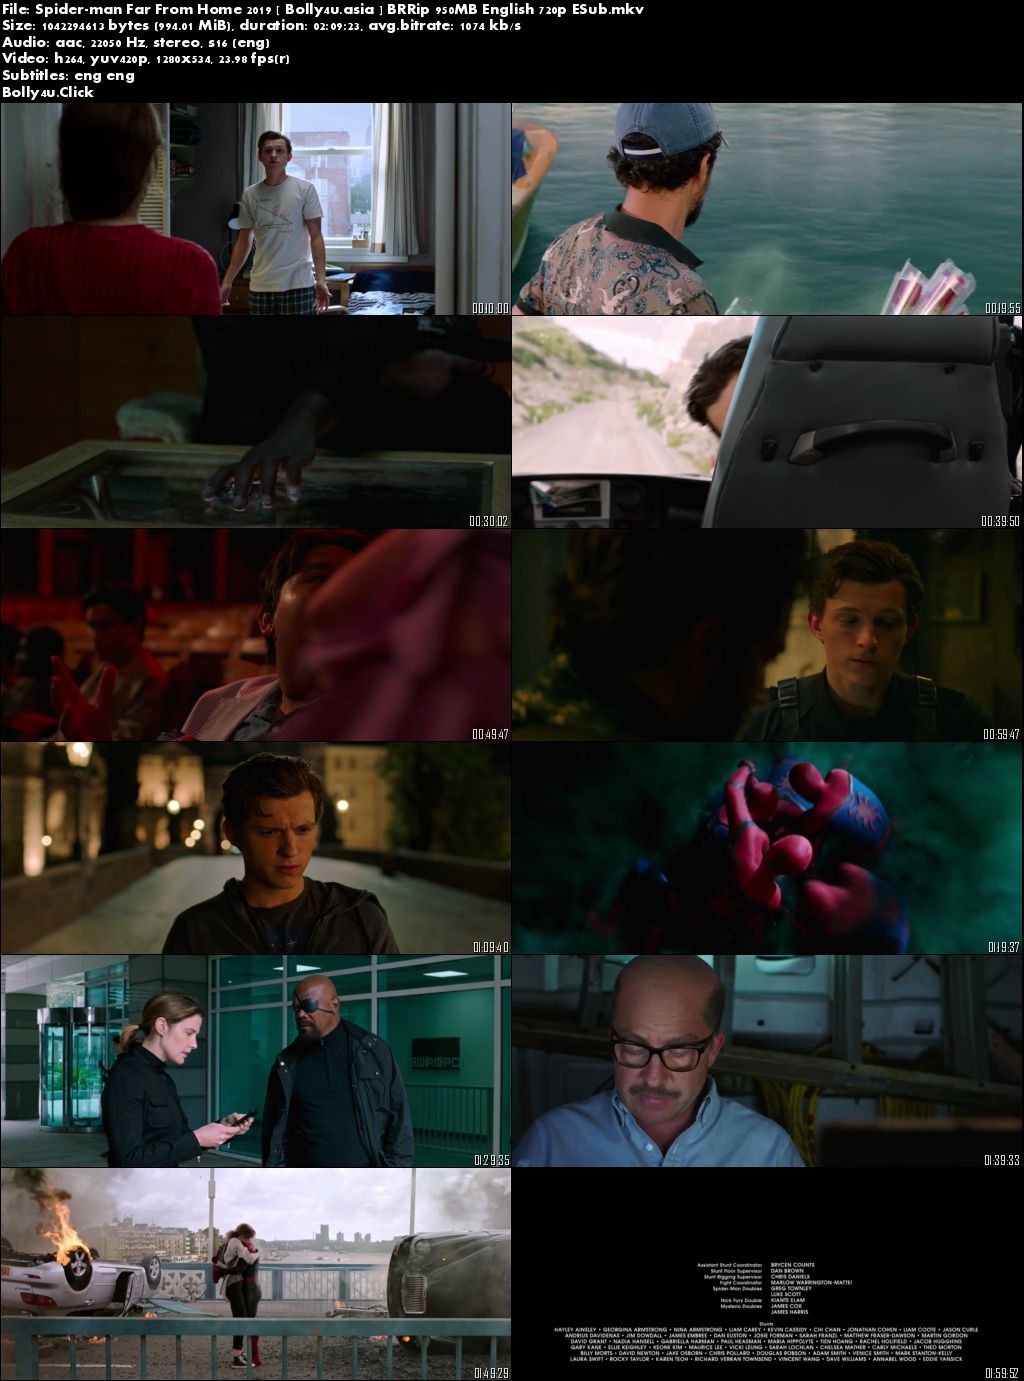 Spider-man Far From Home 2019 BRRip 300Mb English 480p ESub Download